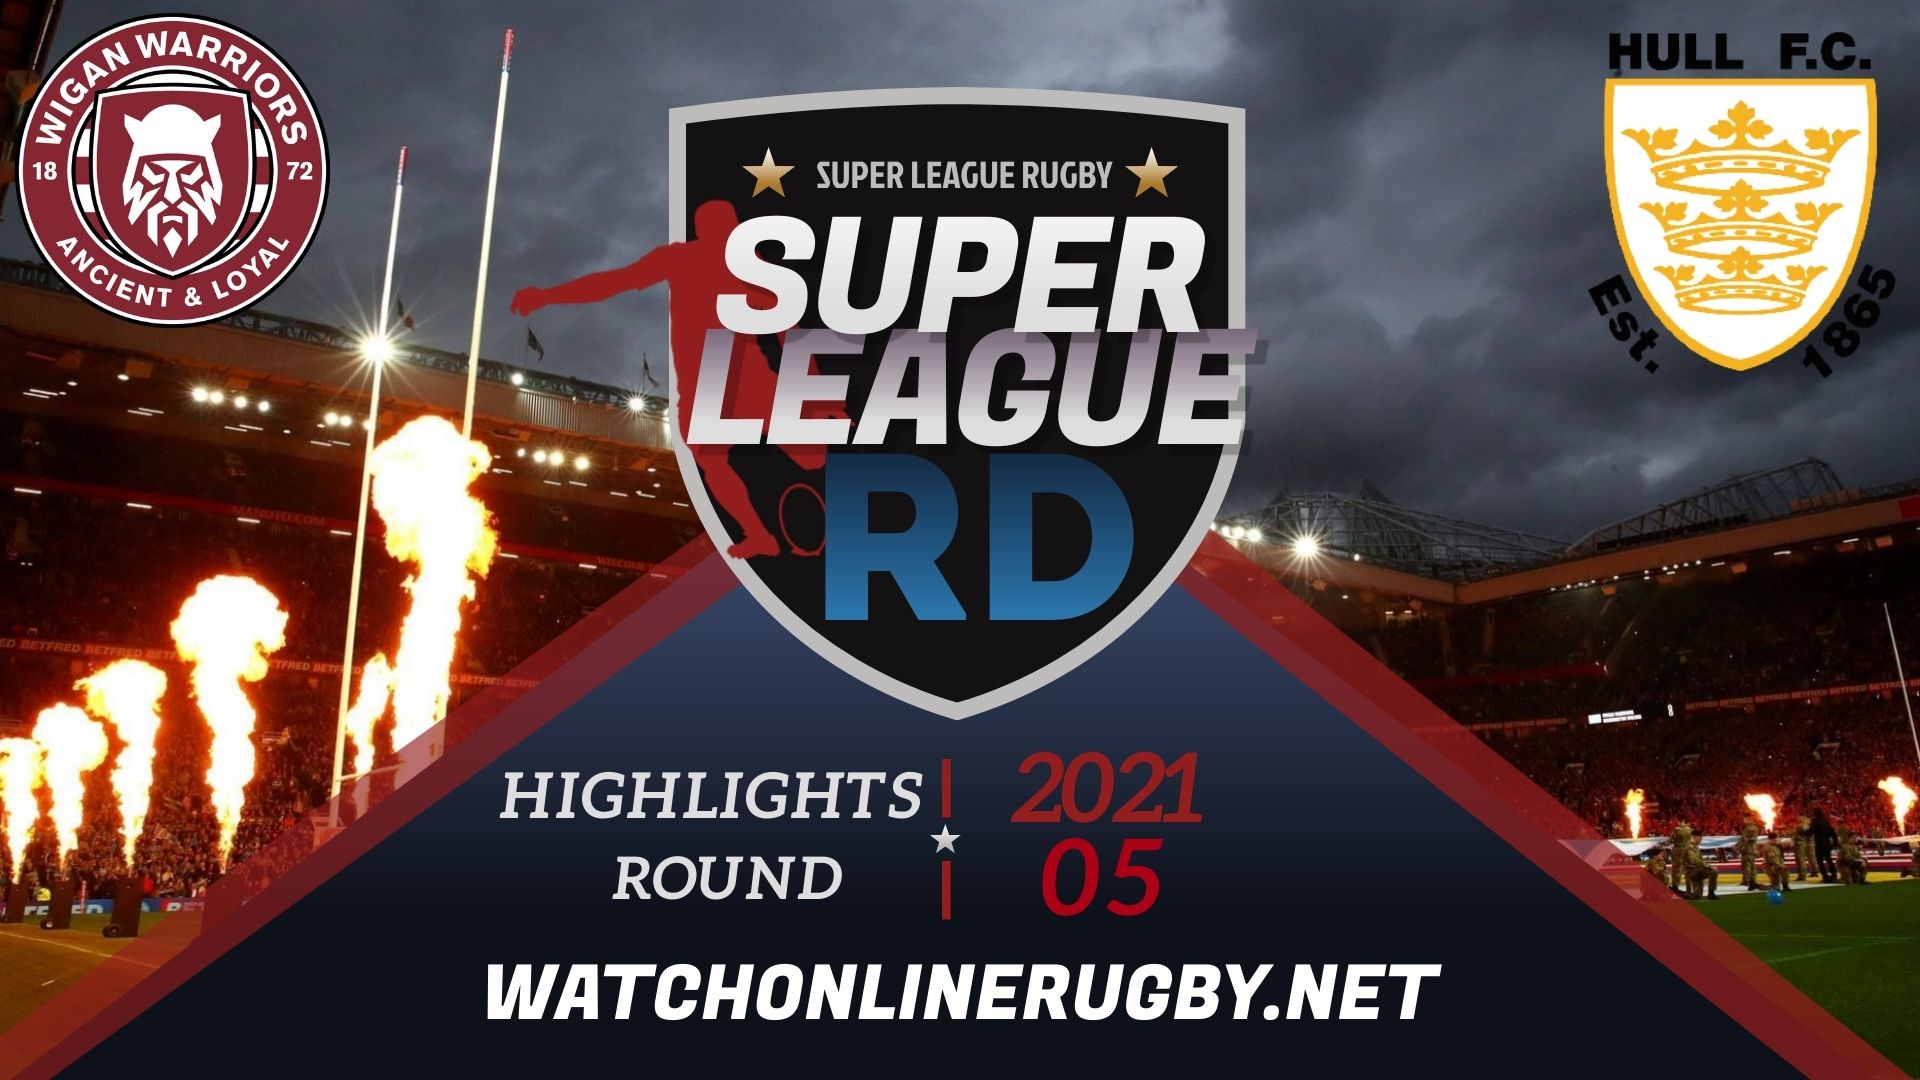 Wigan Warriors Vs Hull FC Super League Rugby 2021 RD 5